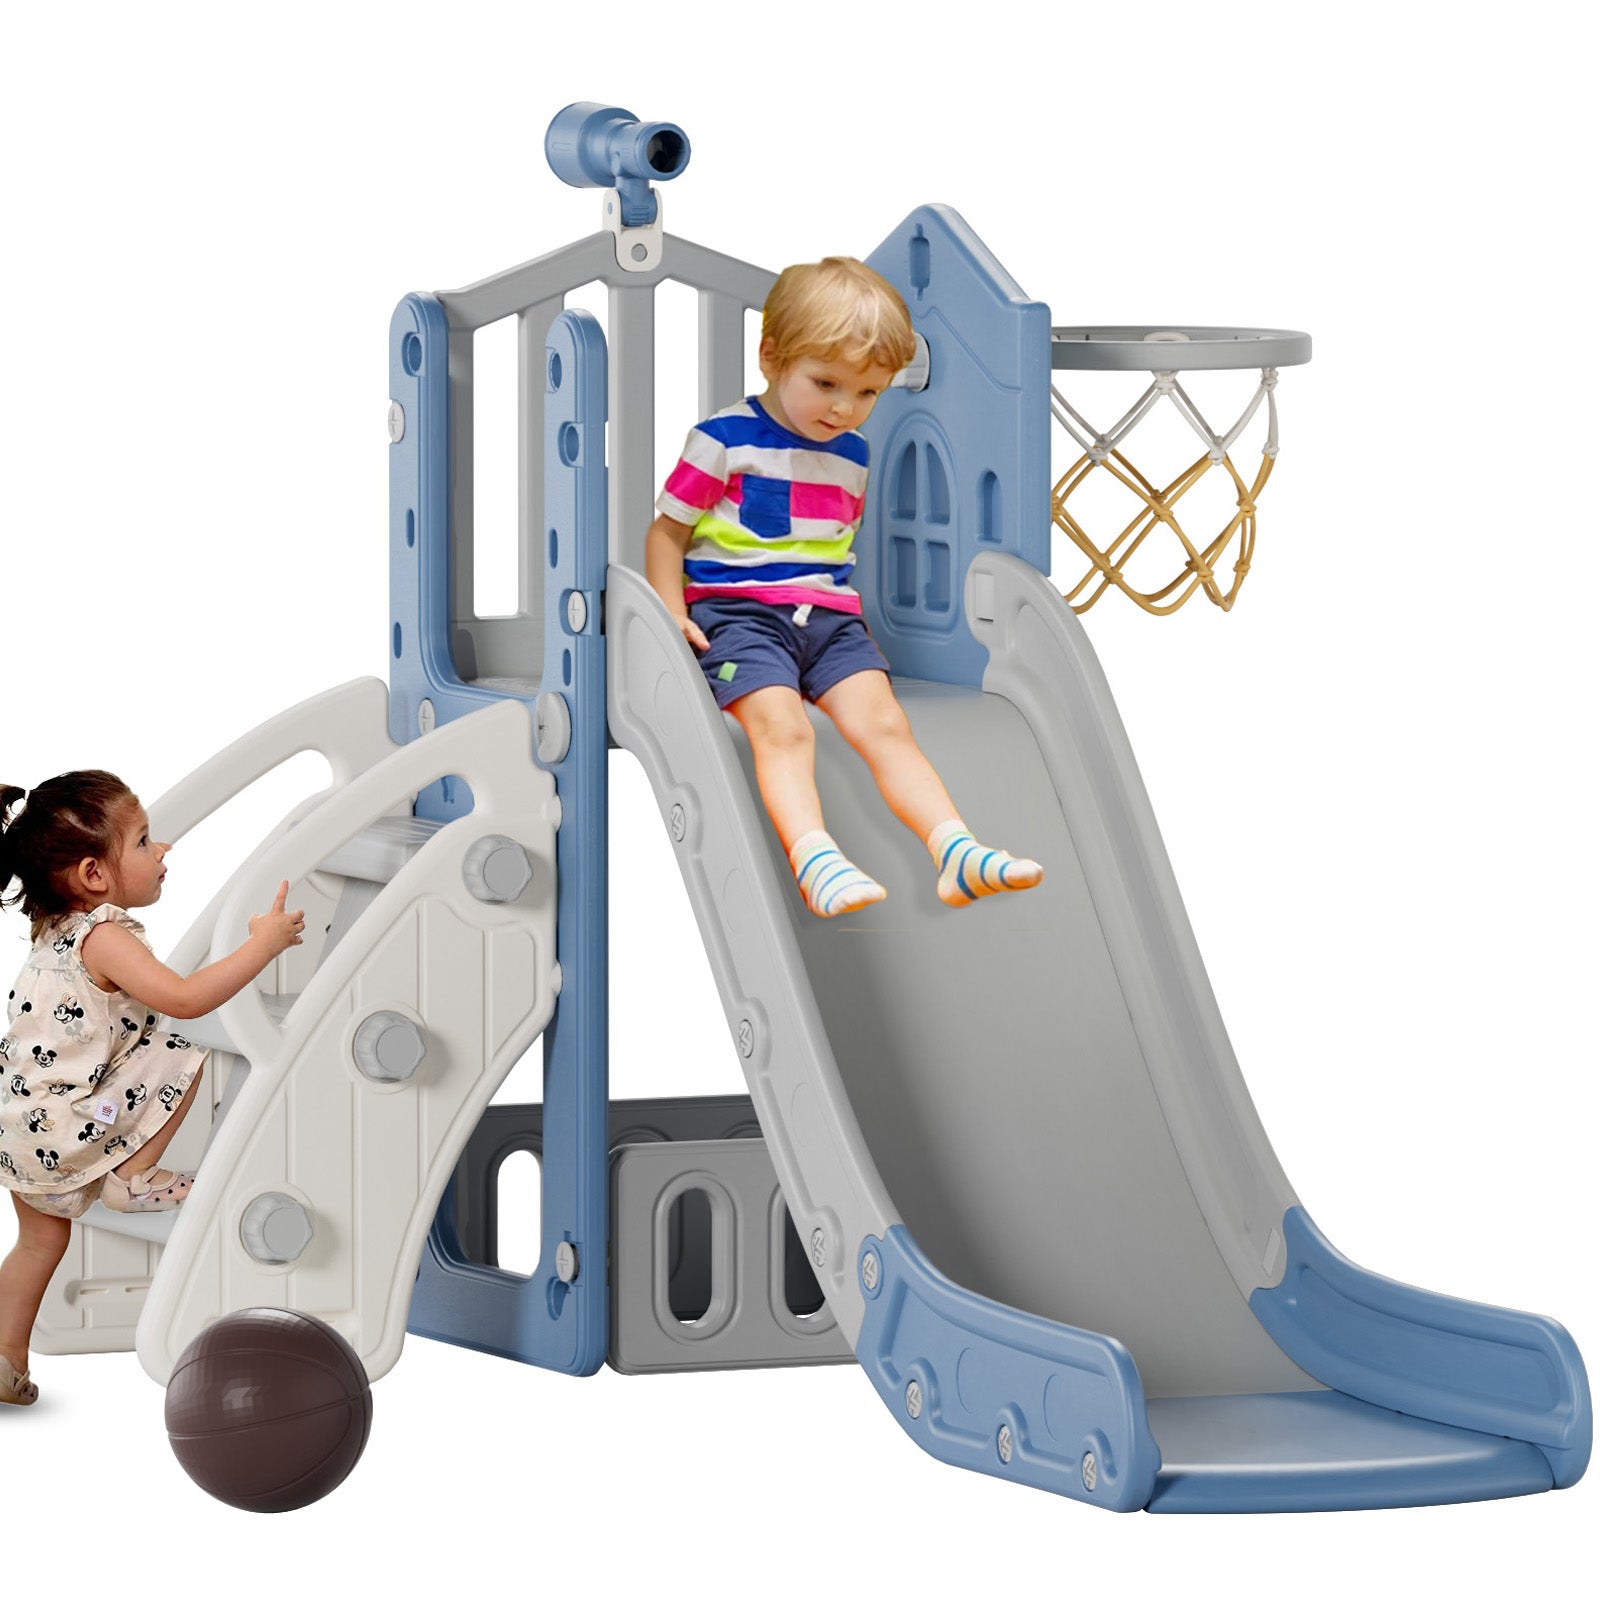 XJD 5 in 1 Toddler Slide Set  Climber Slide for Age 1-3, Outdoor Indoor Playset, Slide with Basketball Hoop, Telescope, and Storage Space, Blue/Grey